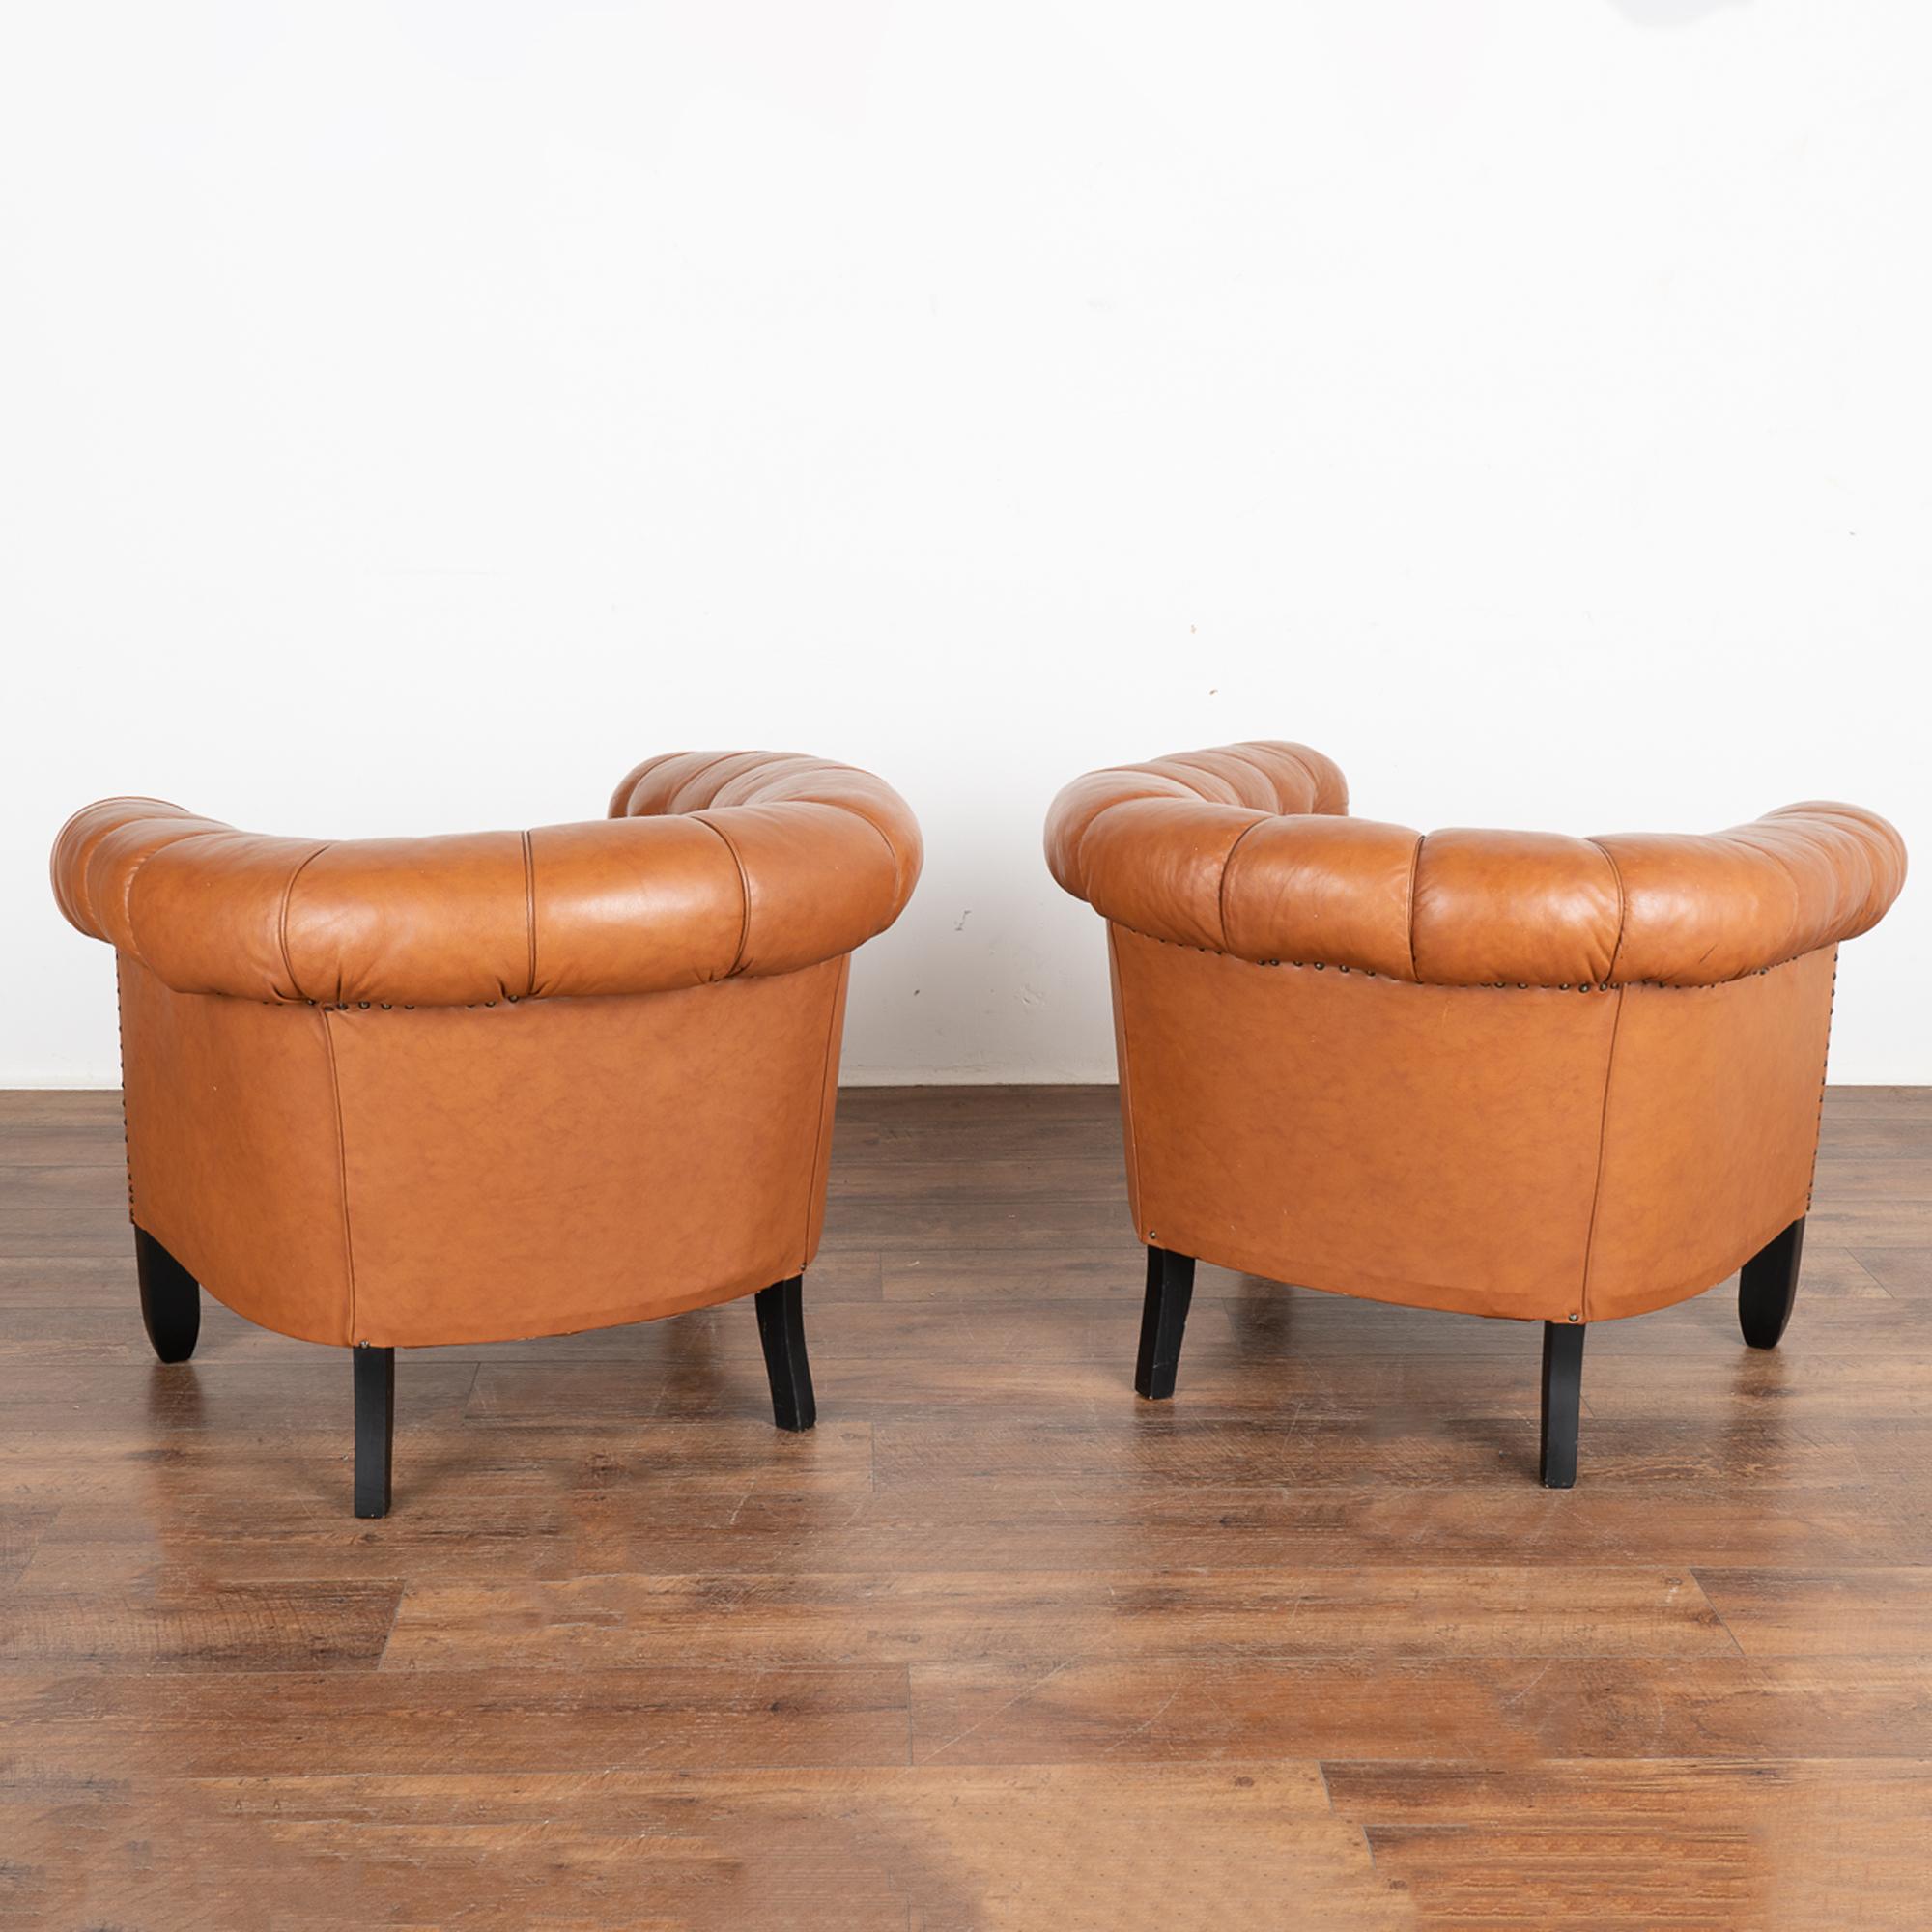 Pair, Vintage Brown Leather Barrel Back Arm Chairs, Denmark circa 1940 For Sale 7